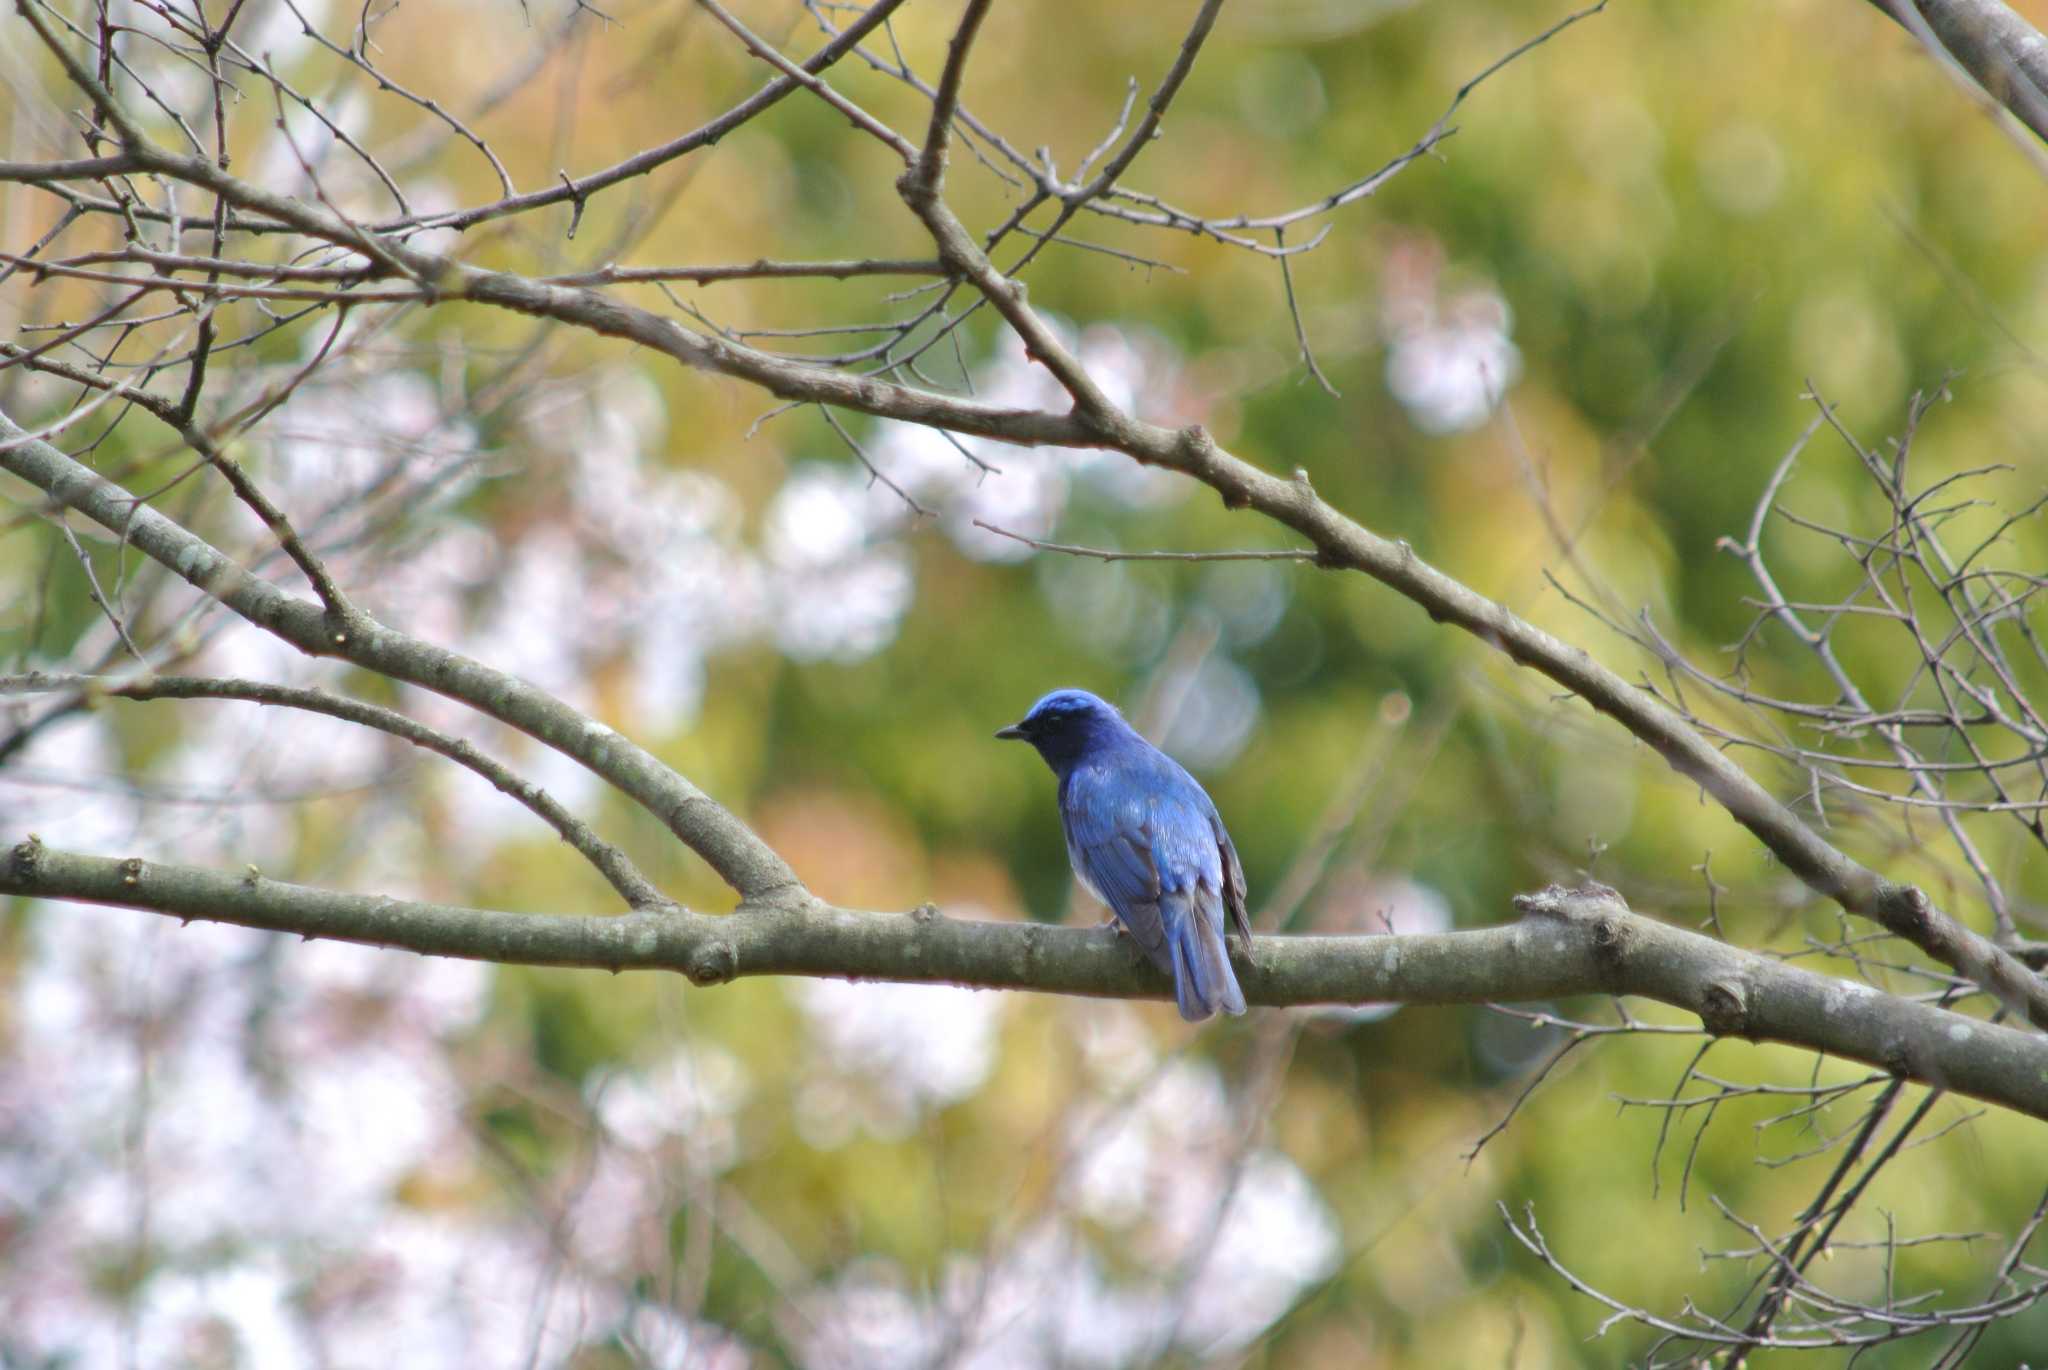 Photo of Blue-and-white Flycatcher at 南港野鳥園 by Daguchan